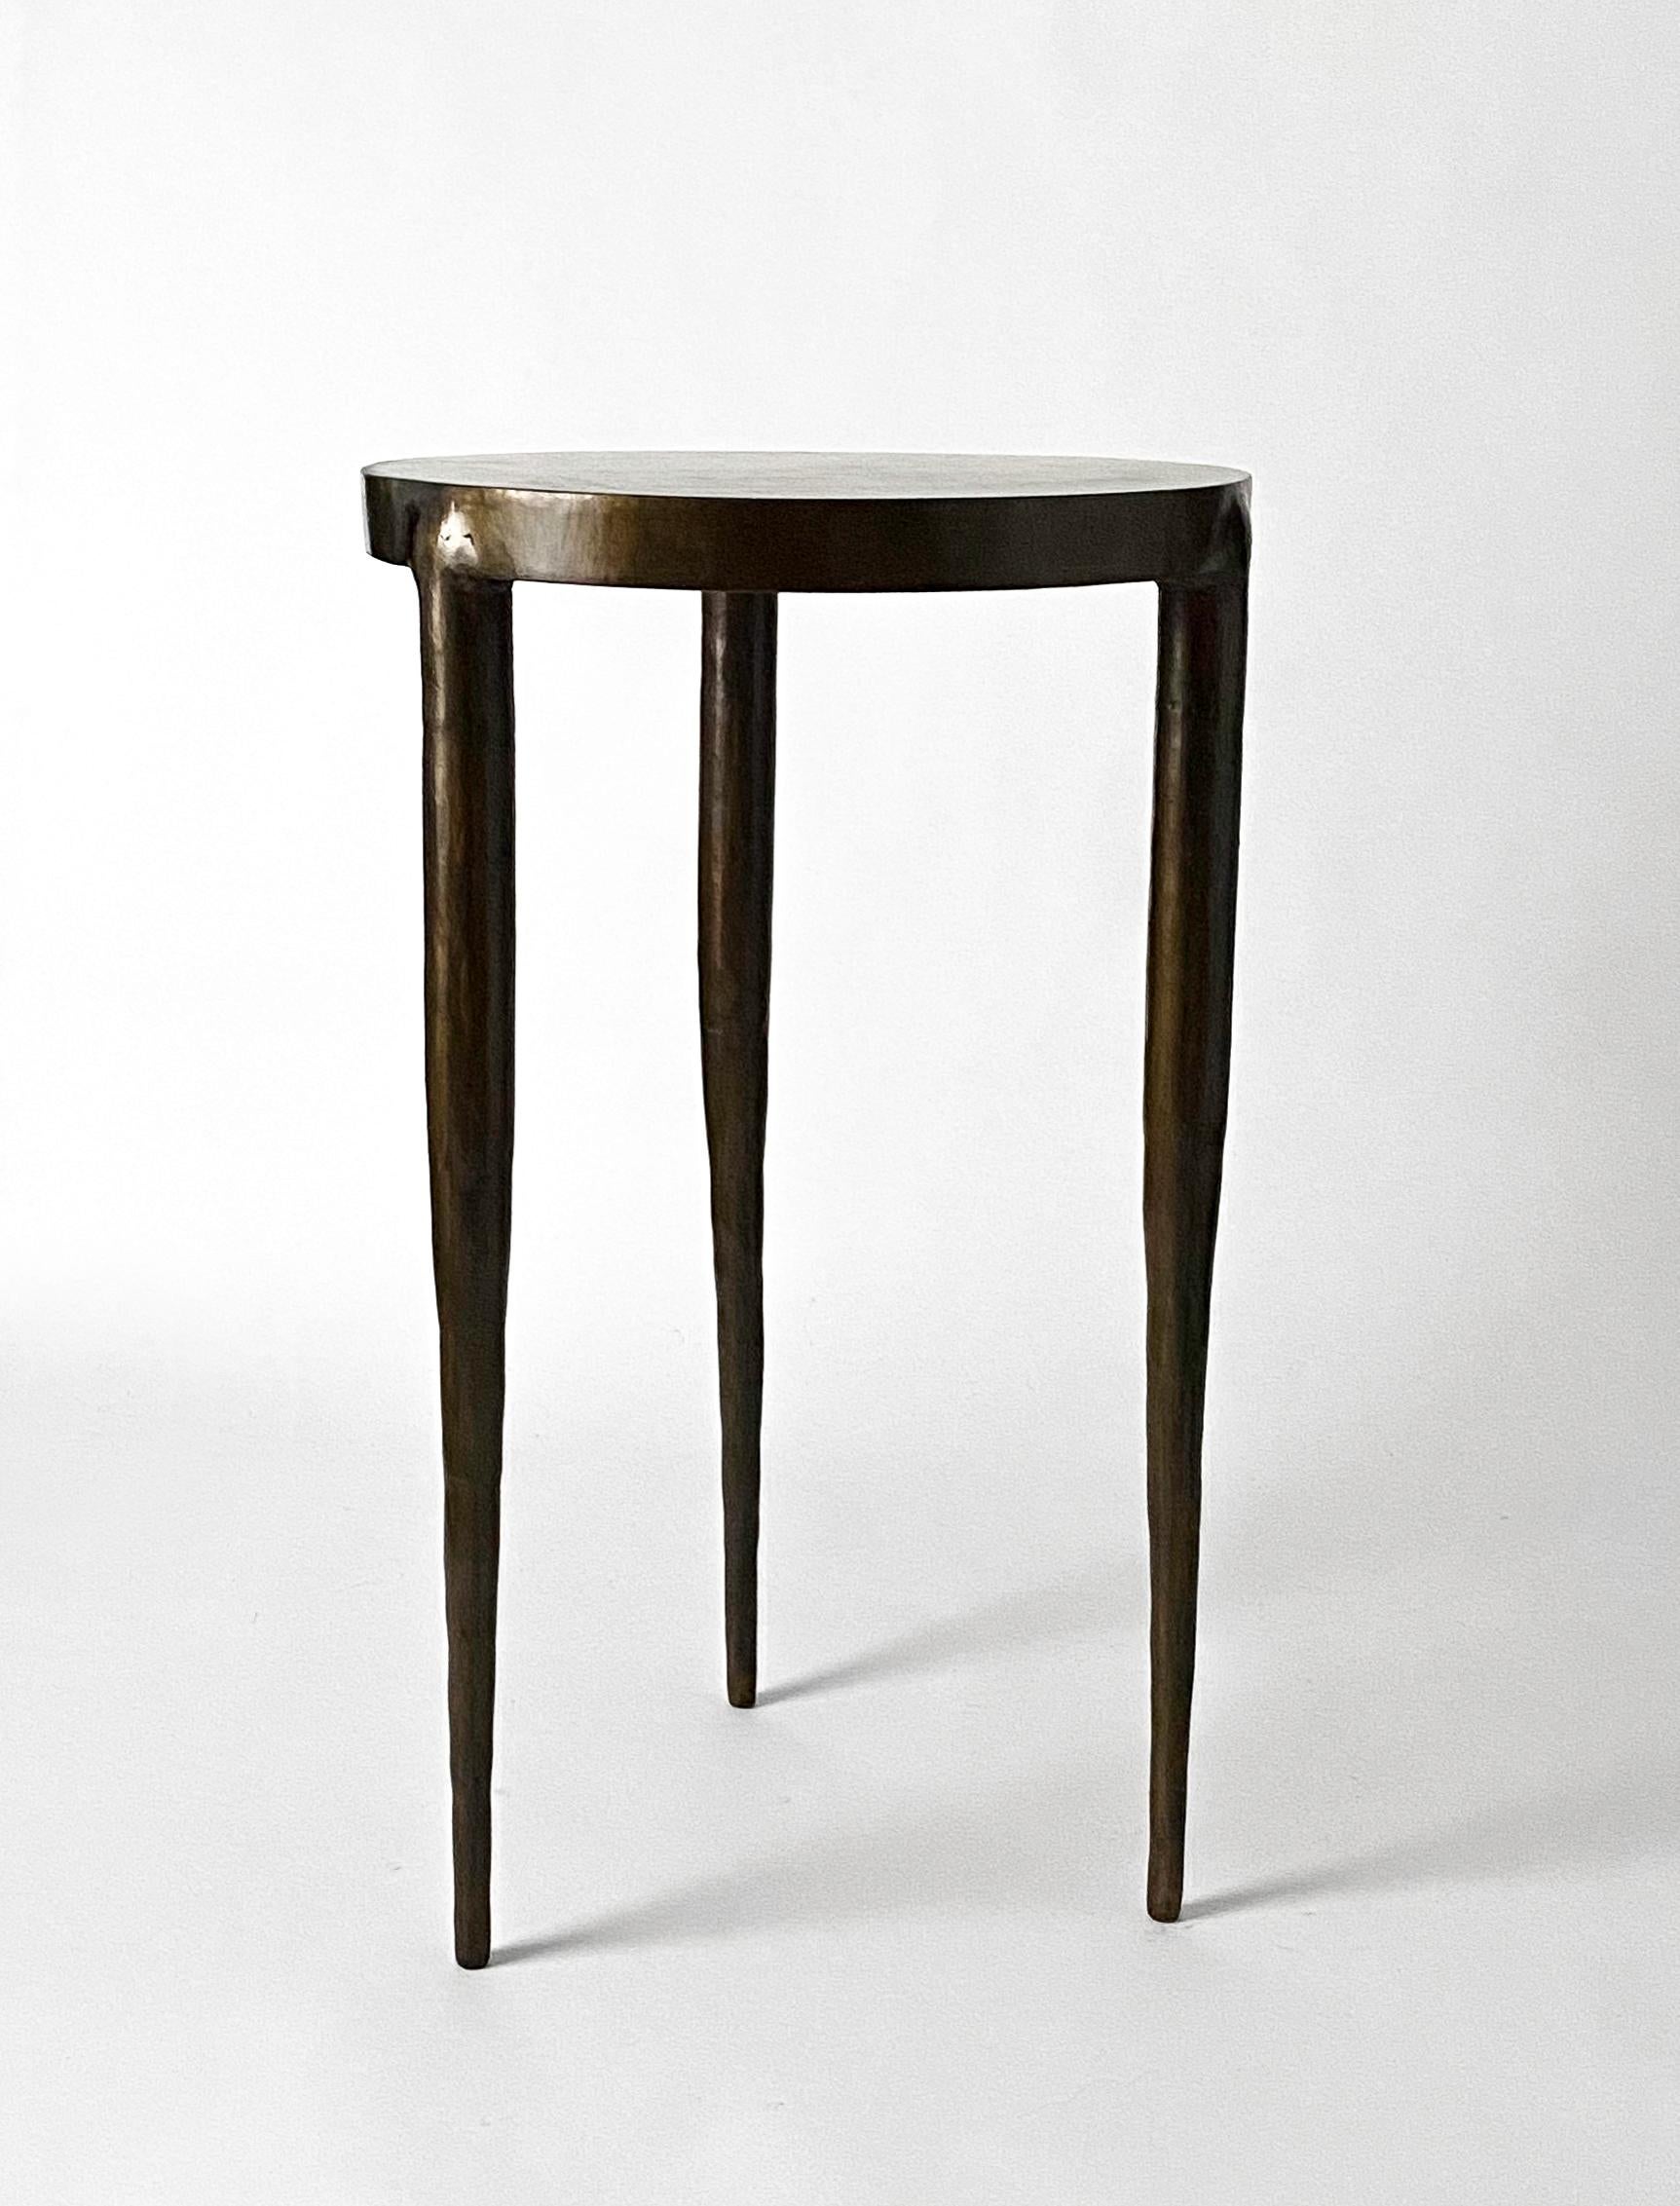 Bough Table by Cal Summers
Dimension:  D 58.42 x H 34.29 cm
Materials: Sculpted Steel with Bronze Patina and Waxed Finish.

Cal Summers is a British designer who makes bespoke handmade furniture and contemporary artefacts in which he challenges the